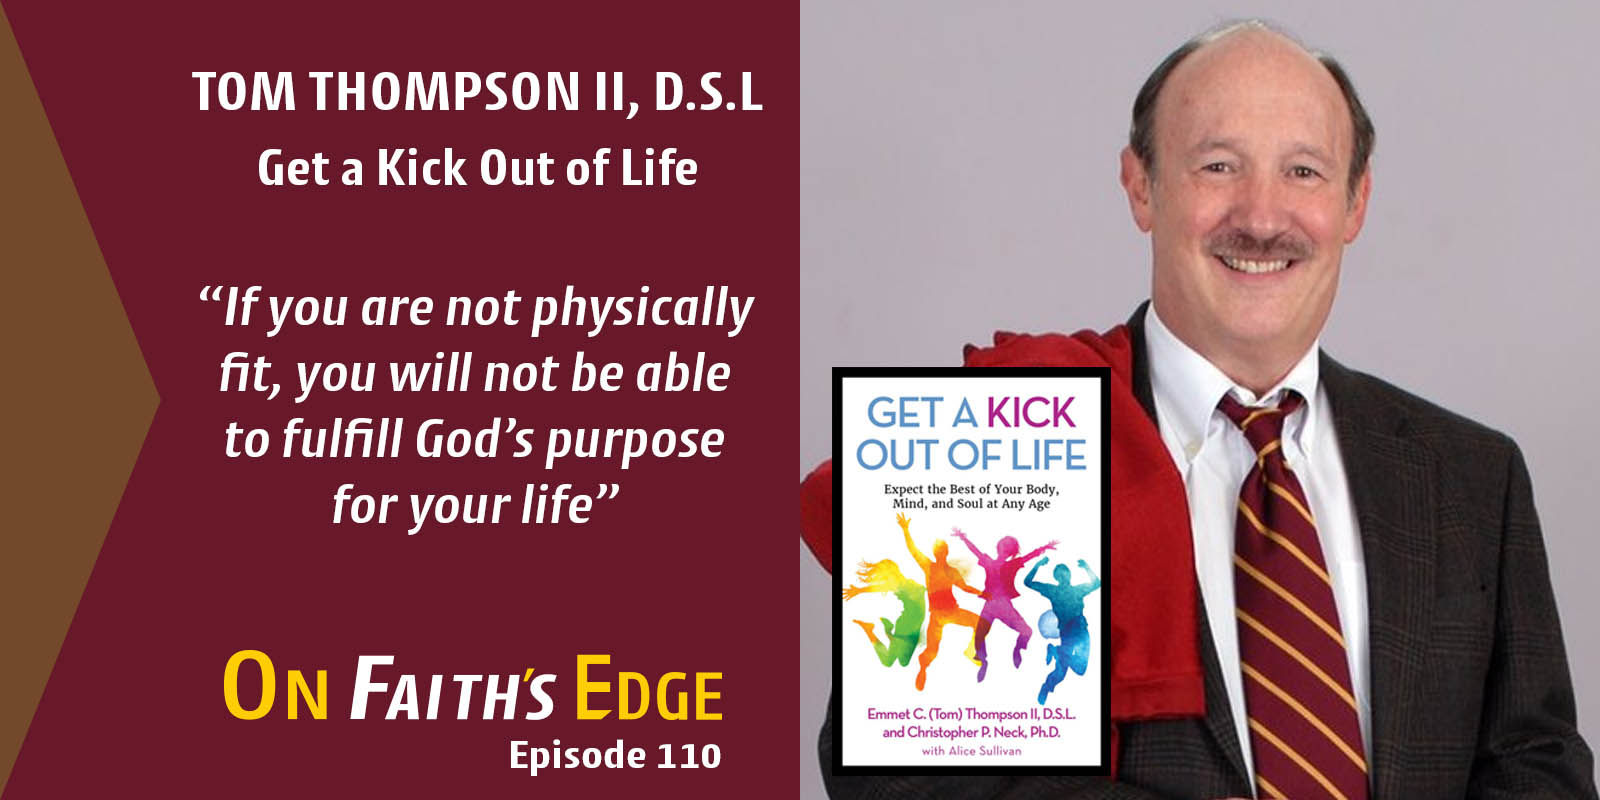 A Vibrant Mind, Body, and Soul at ANY Age – World Record Holder, Tom Thompson II, D.S.L.